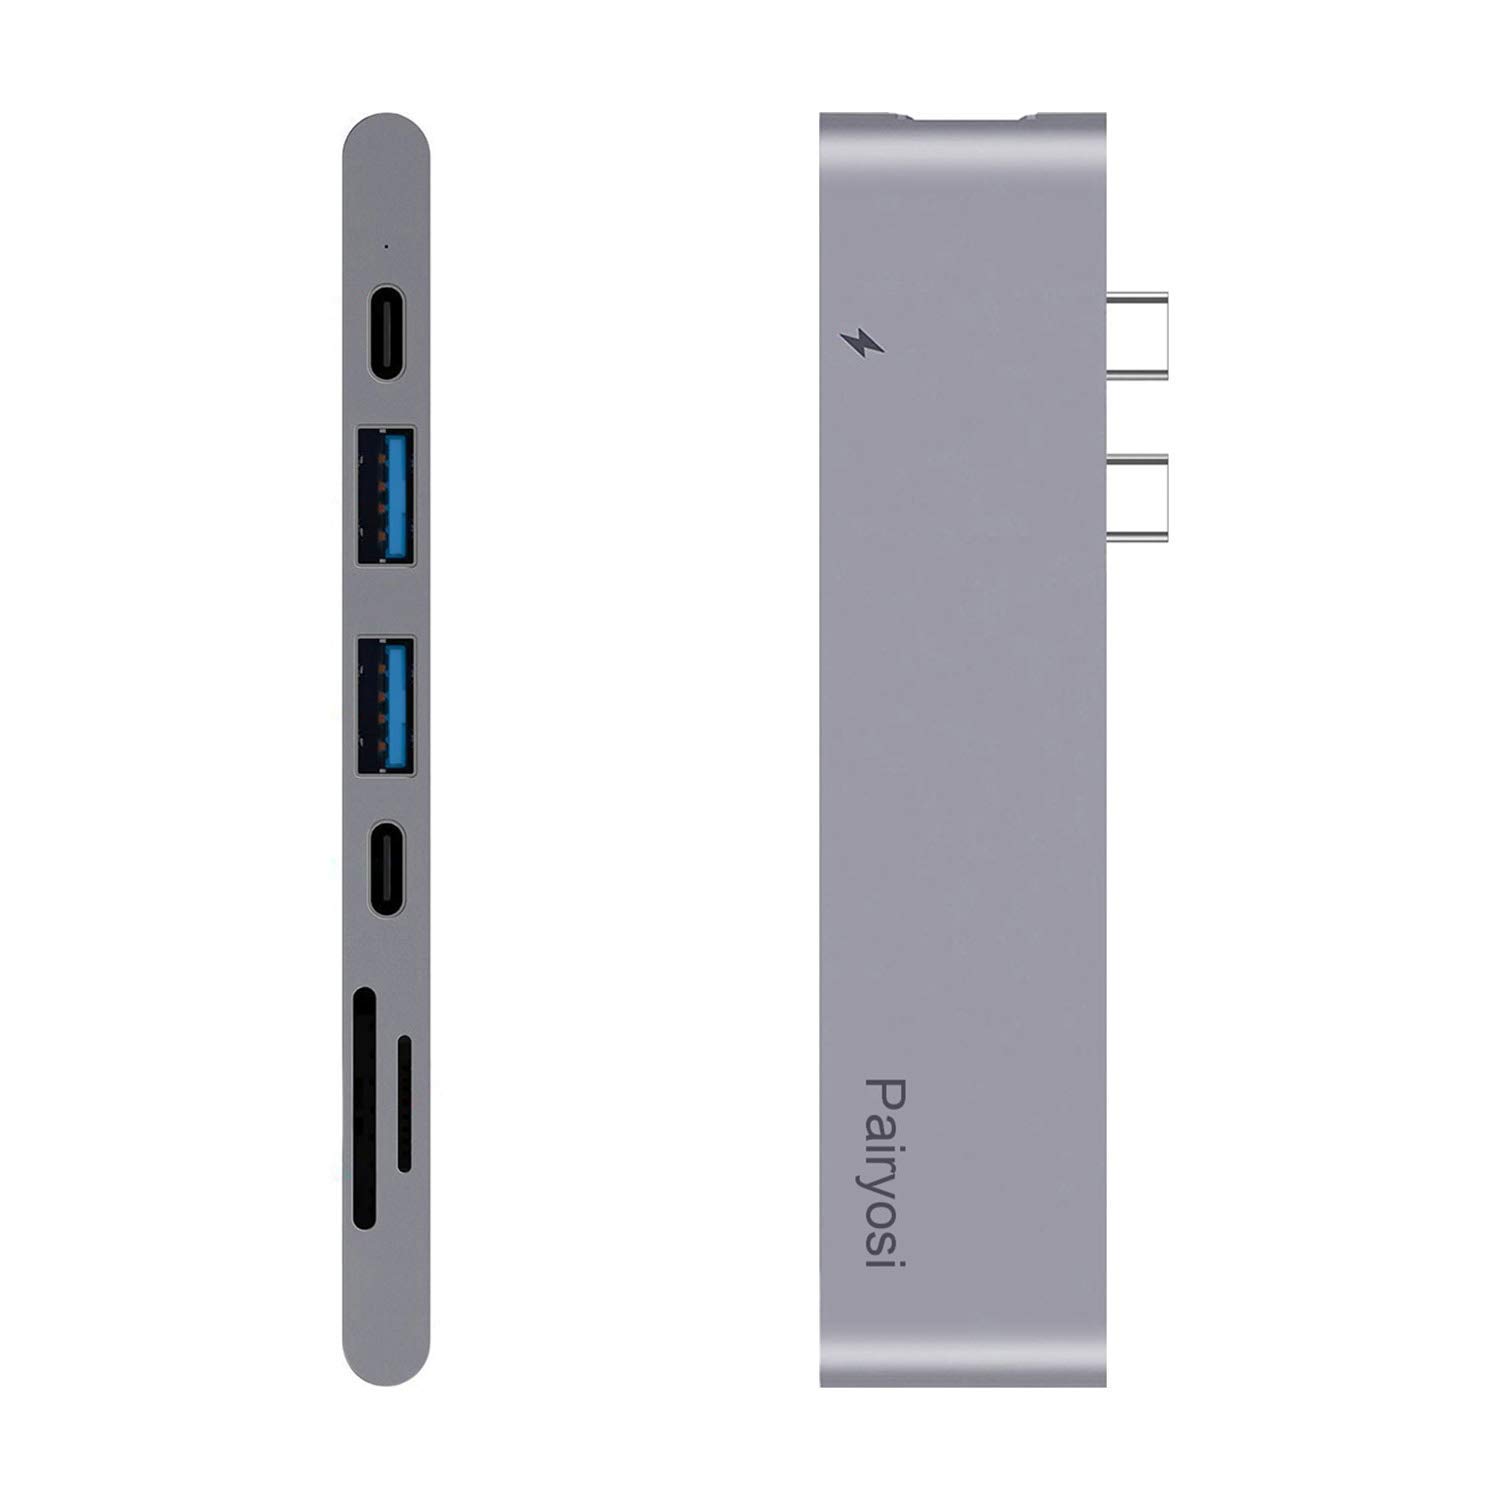 Pairosi 7-in-2 USB C Hub with Multiple Ports (Gray Color)